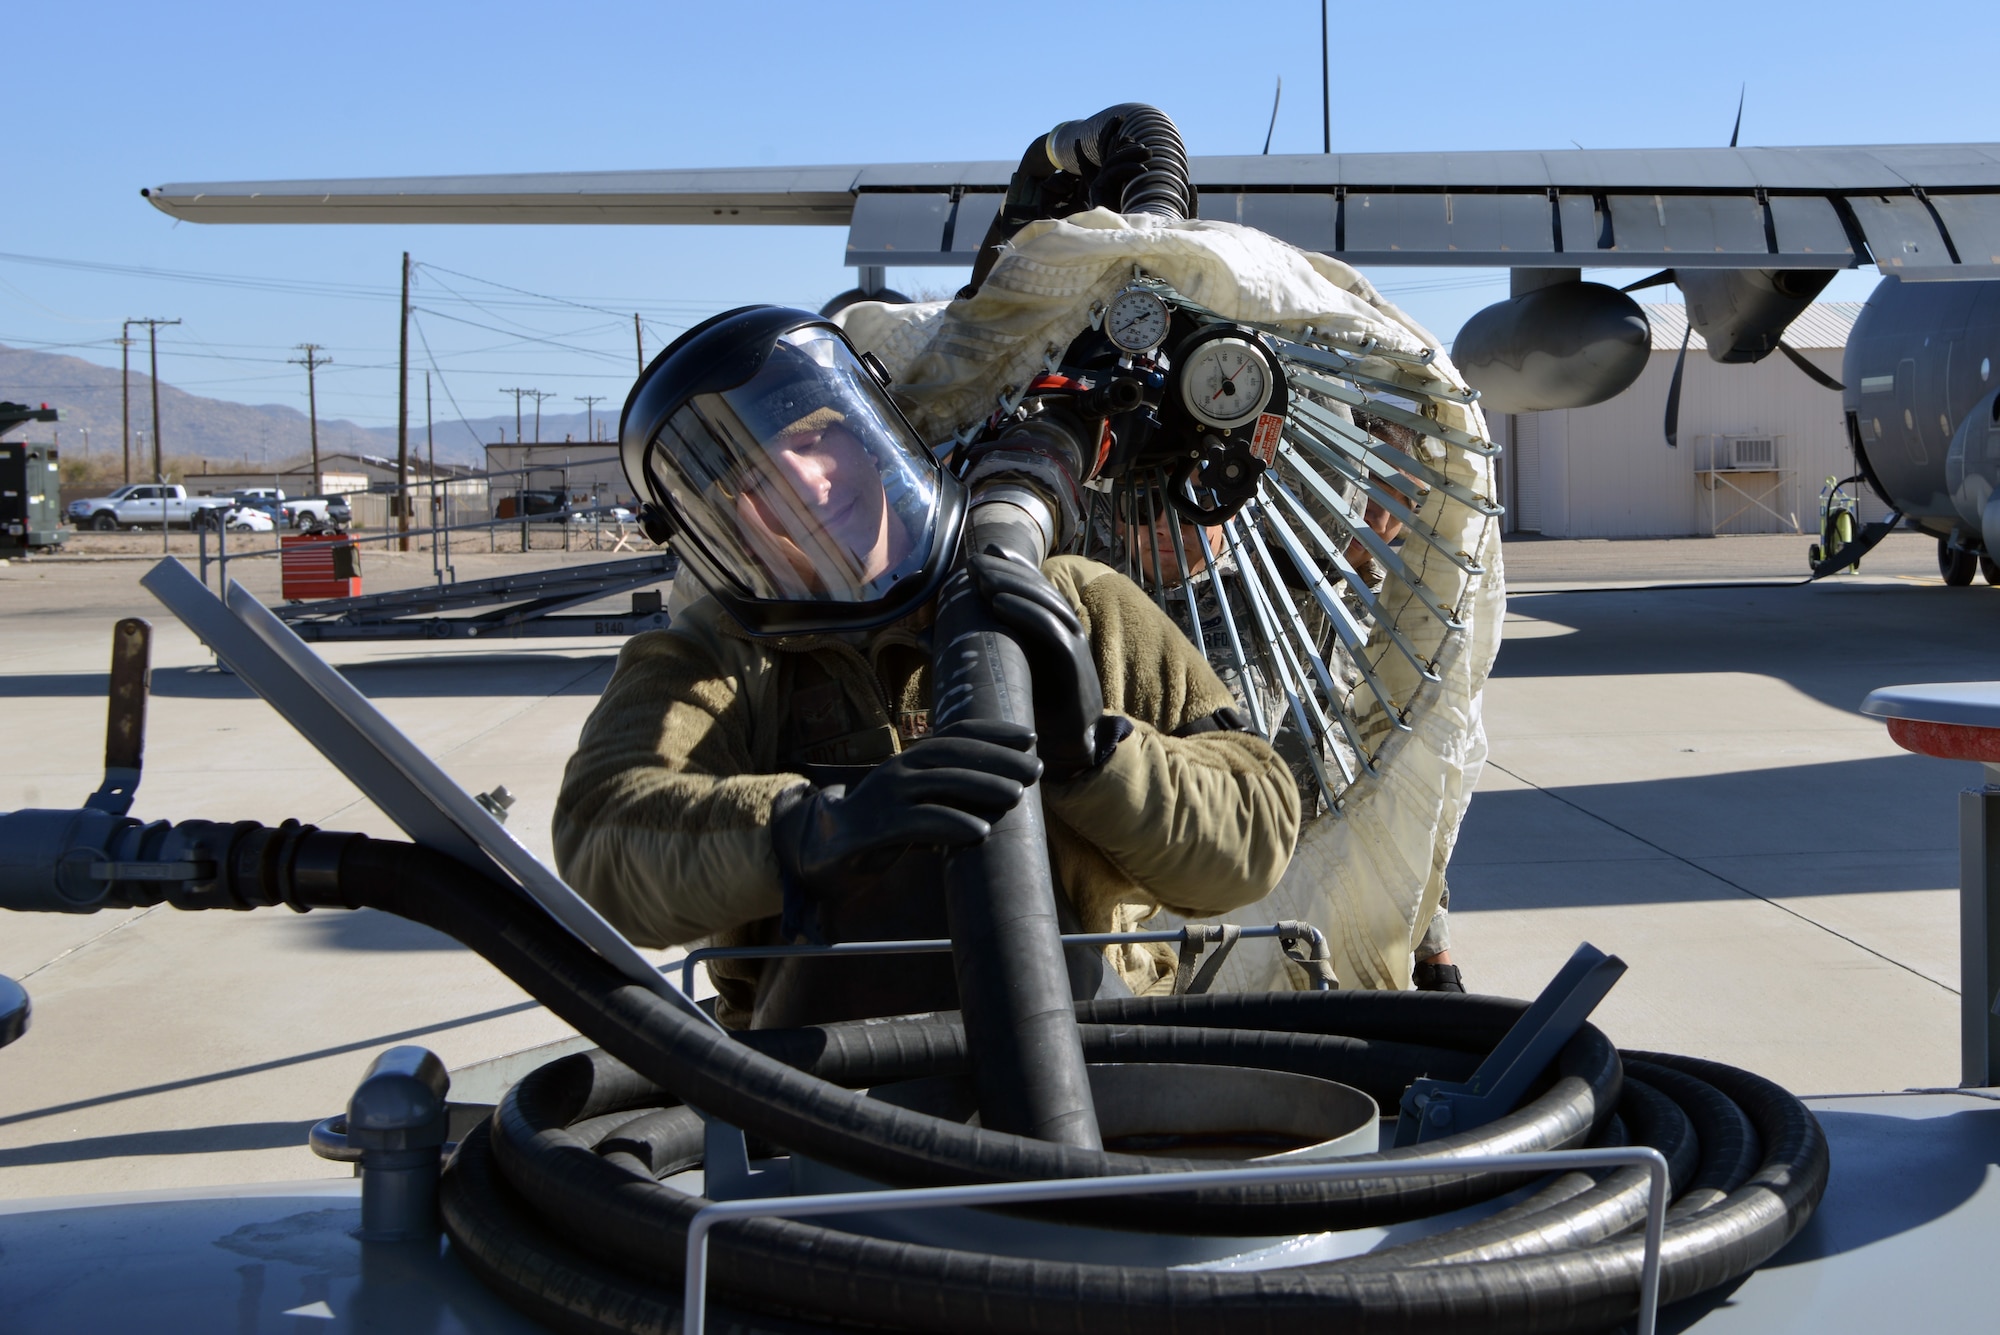 U.S. Air Force Airman 1st Class Jarrett Hoyt, 415th Aircraft Maintenance Unit hydraulics specialist, drains fuel from the inflight refueling pod on a HC-130J Combat King II on the flight line at Kirtland Air Force Base, N.M., Nov. 14, 2019.  The 415 AMU is responsible for all maintenance on the MC-130J Commando II and HC-130J Combat King II aircraft assigned to keep them mission ready for the 415th Special Operation Squadron.